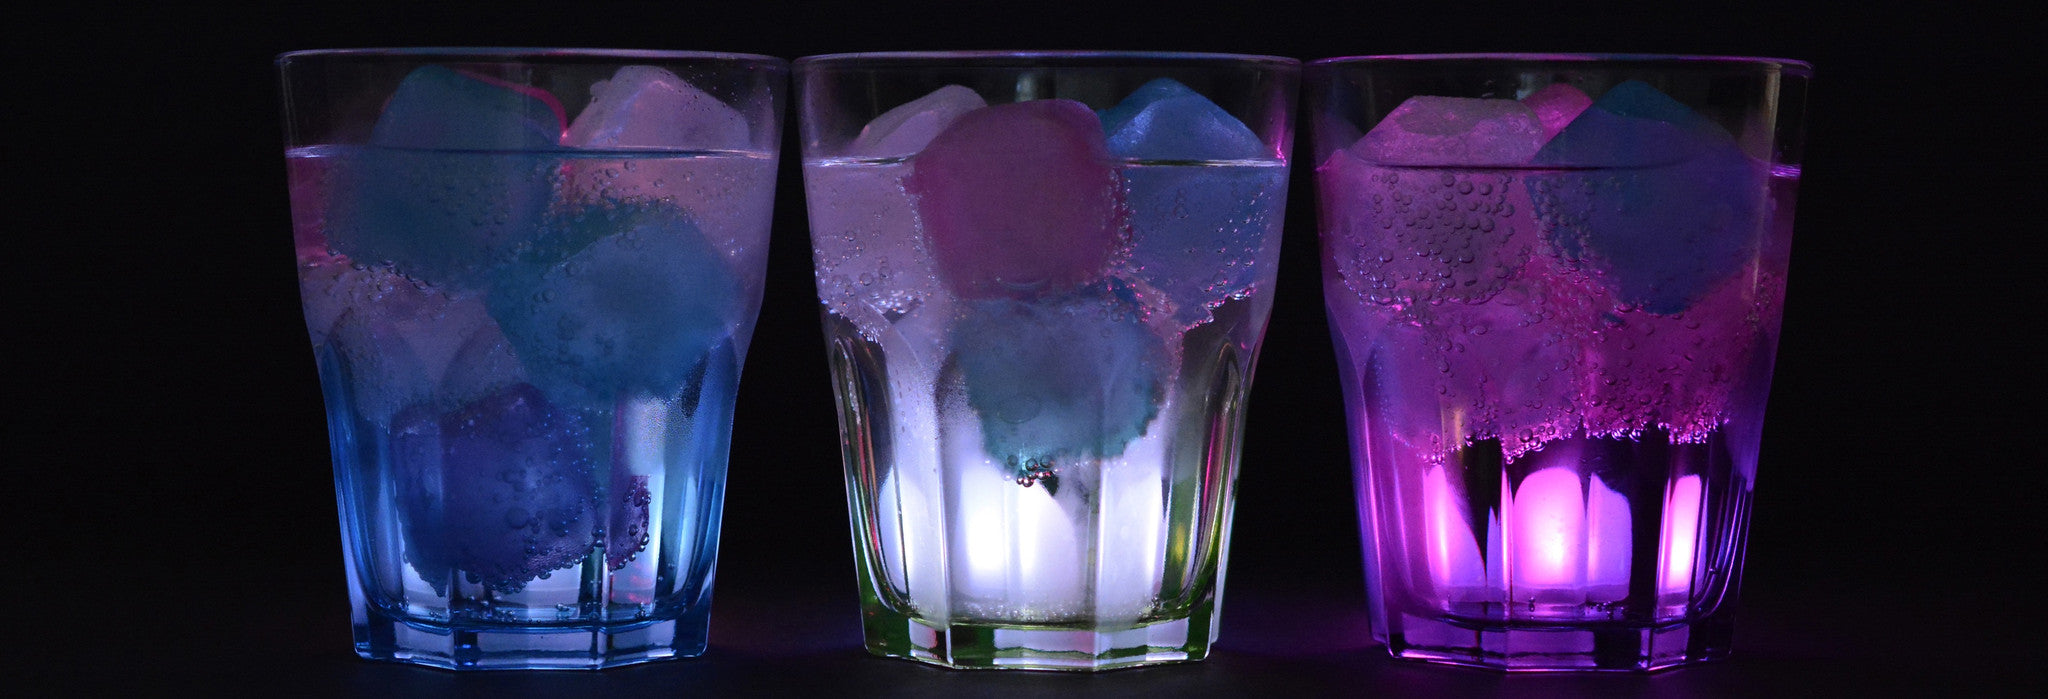 Top 10 Genius Ideas to Jazz Up Your Ice-Cubes